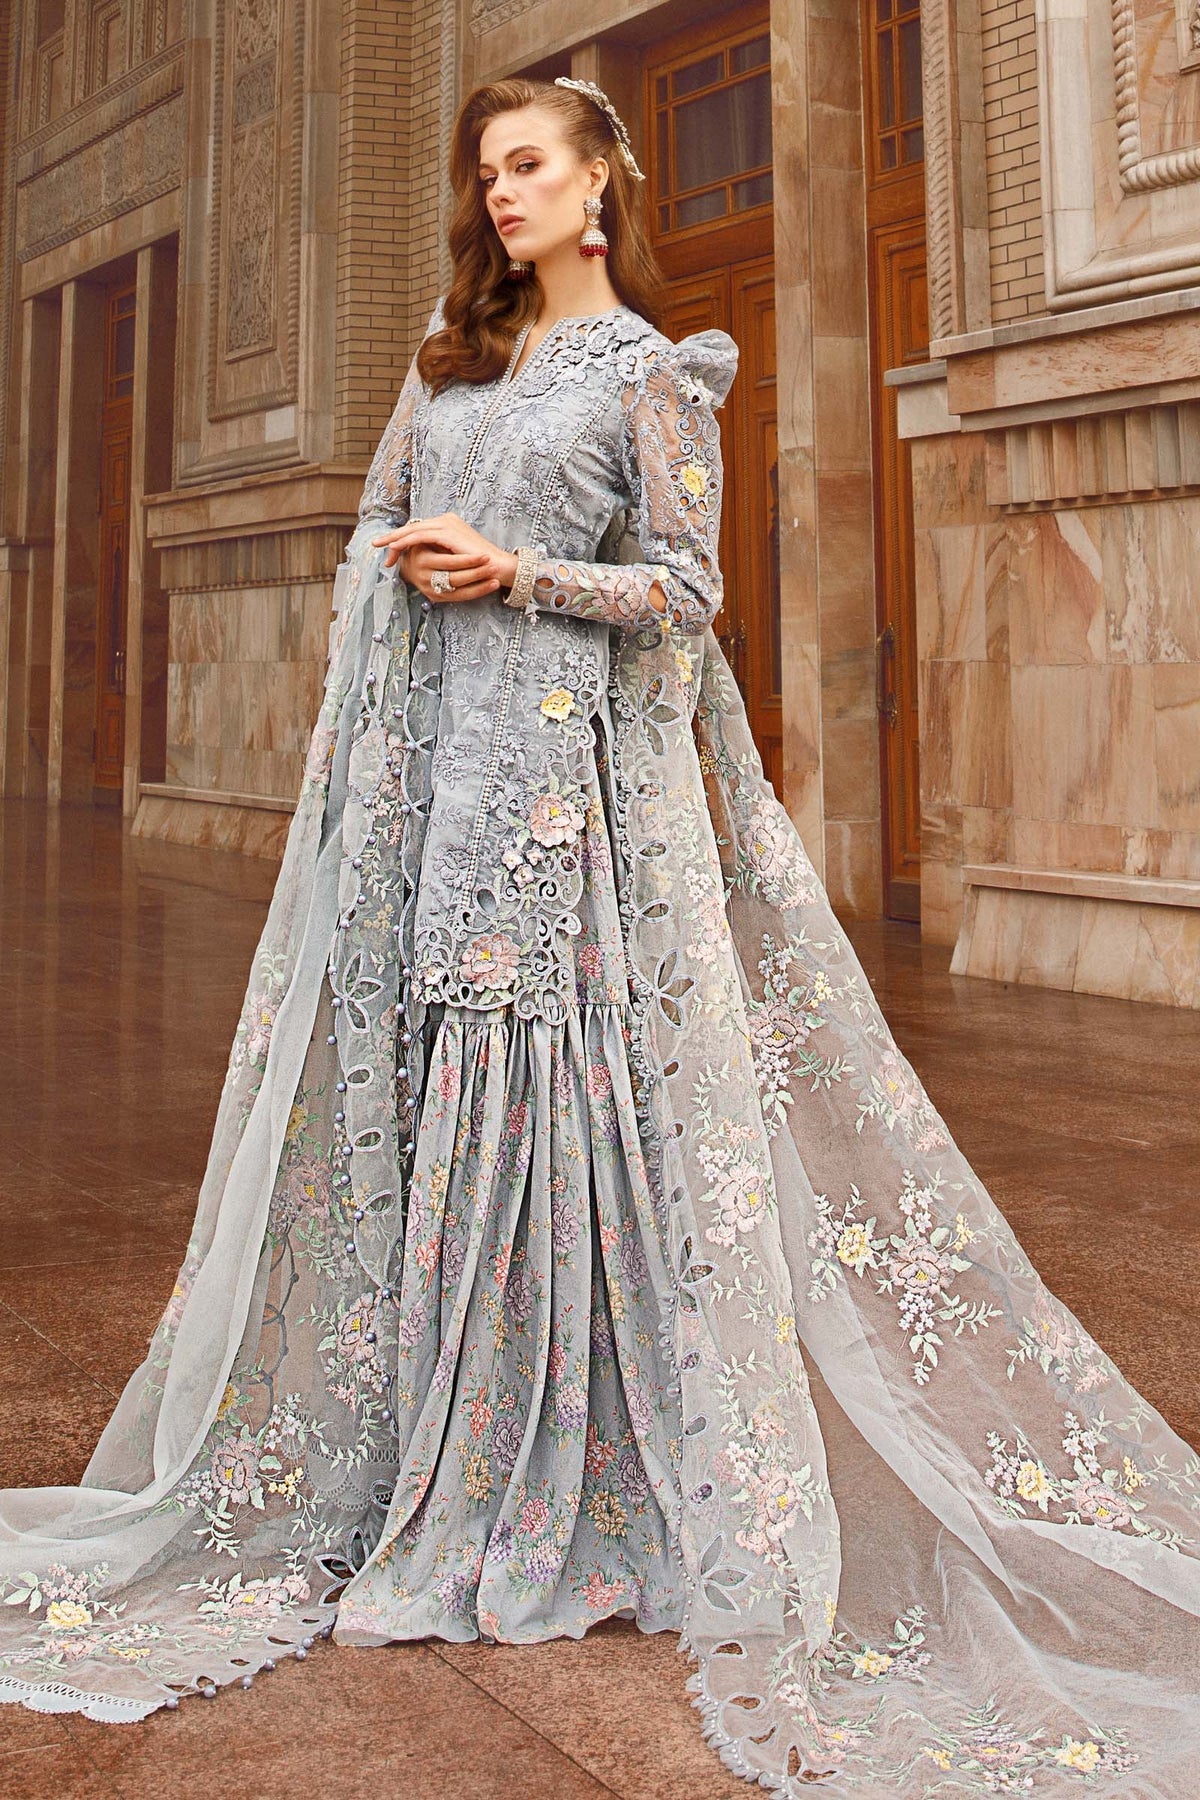 Maria B Inspired Embroidered Grey 3 Piece Outfit With Net Dupatta - Desi Posh